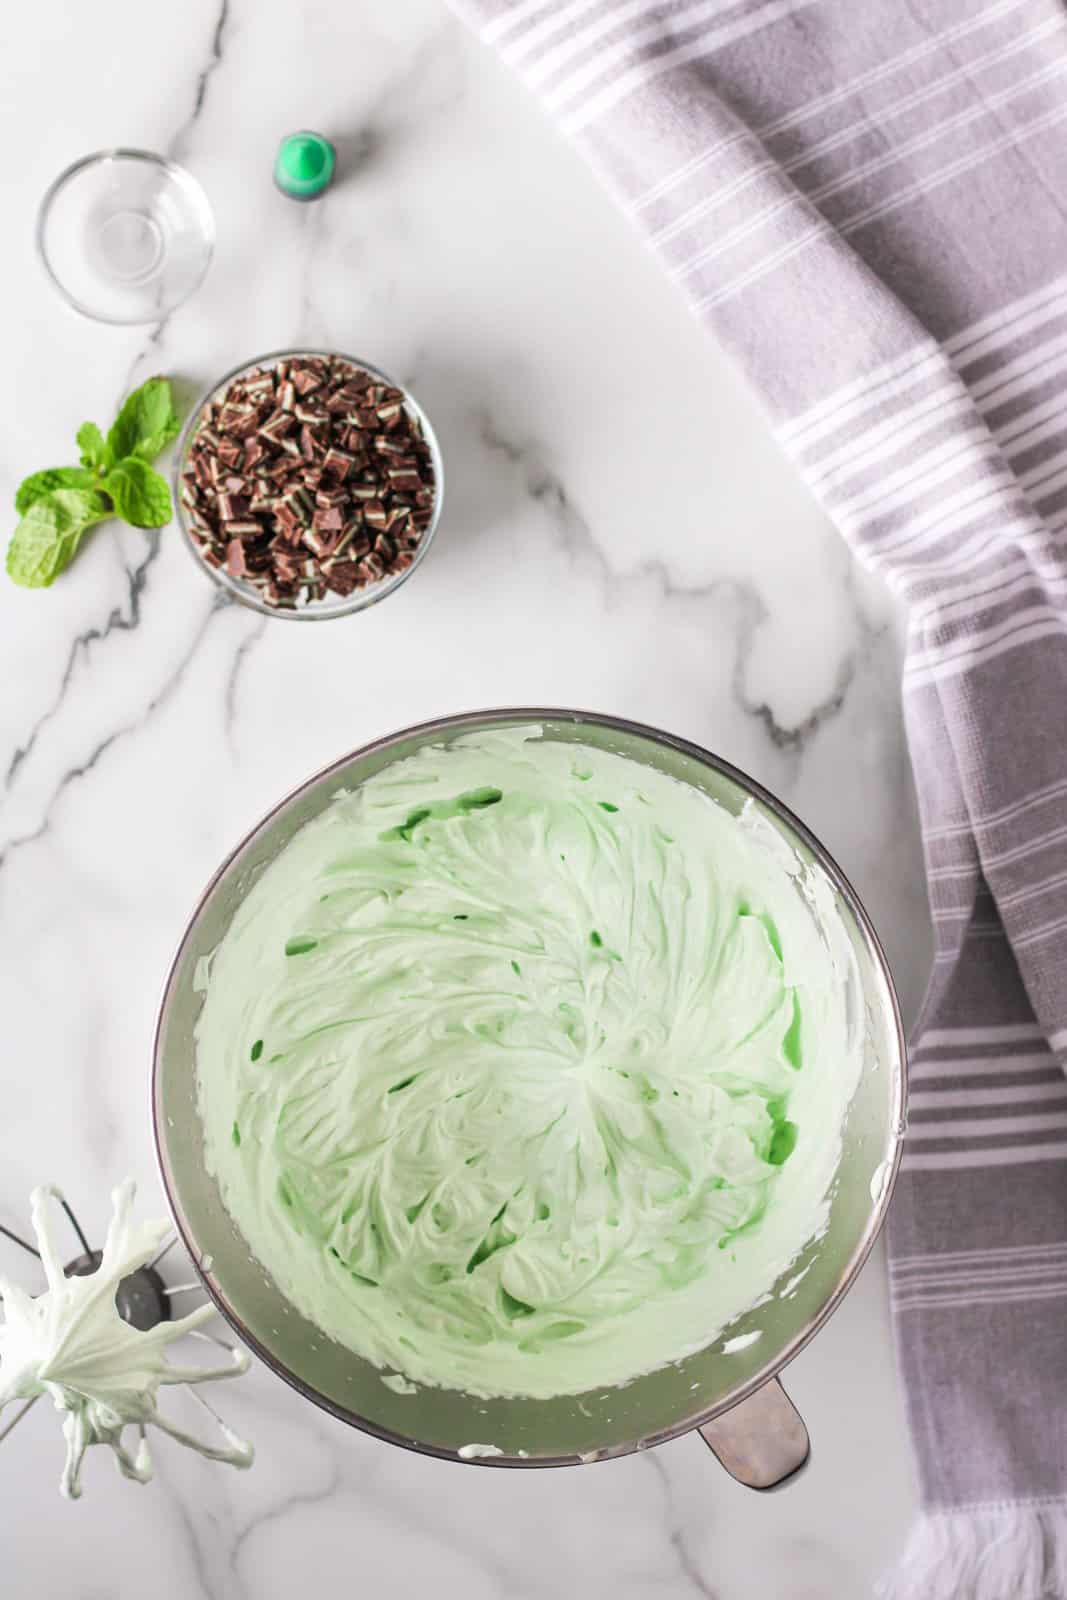 Sweetened condensed milk, food coloring and mint extract added to whipped cream and beaten.